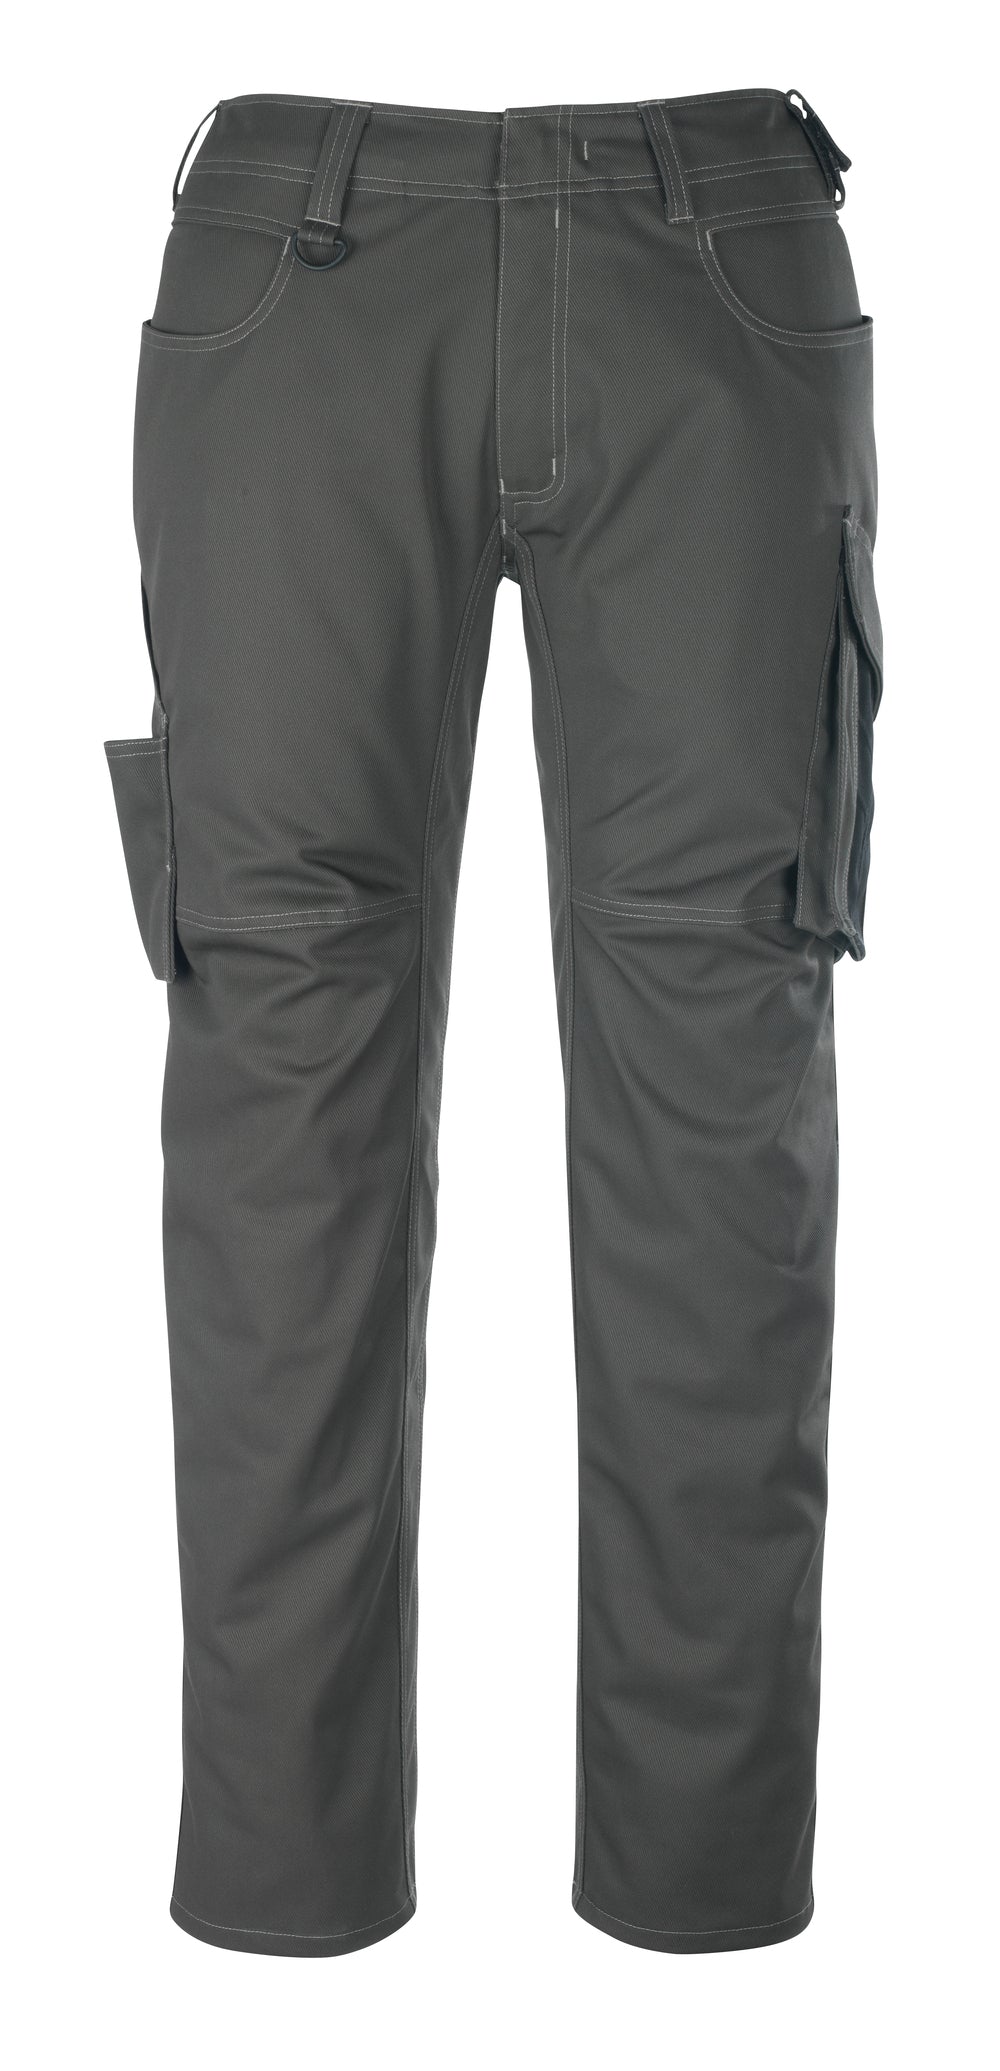 MASCOT®UNIQUE Trousers with thigh pockets Dortmund 12079 - DaltonSafety